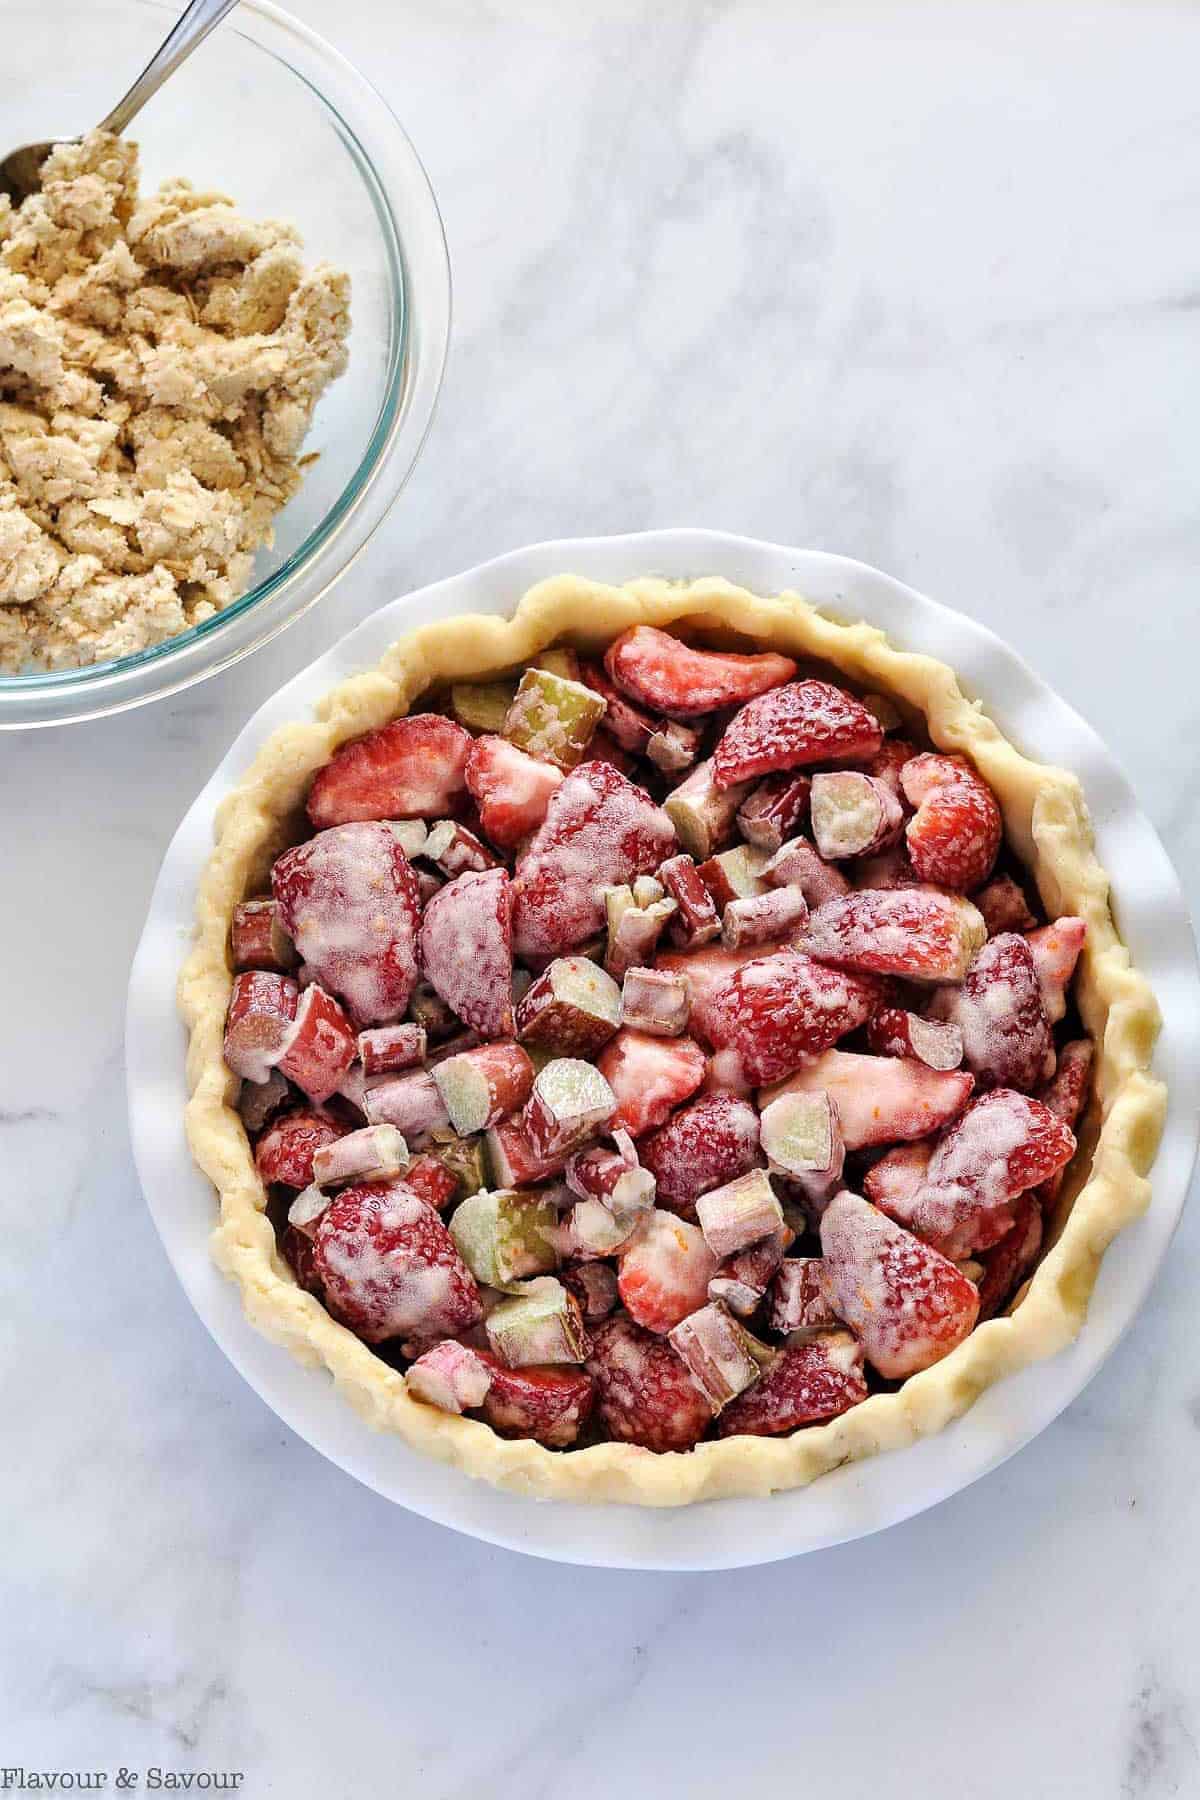 Preparing Strawberry Rhubarb Crumble Pie by filling the unbaked pie crust with sliced fruit.